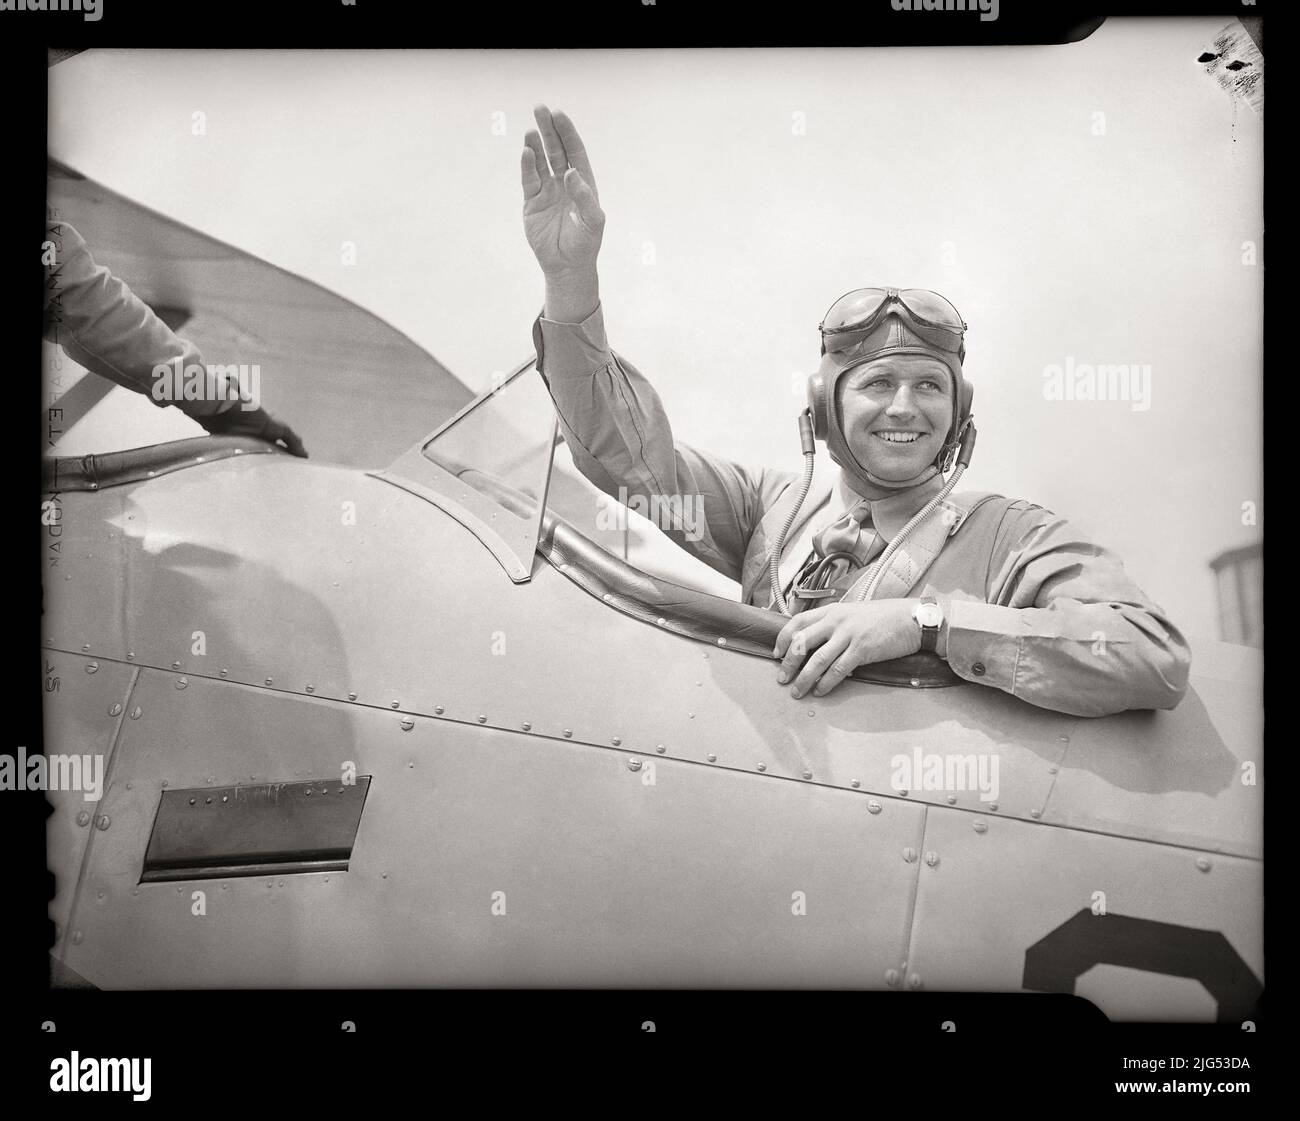 Naval Aviator, Joseph “Joe” Kennedy Jr. waves from the planes cockpit. July 1941. Naval Air Station Squantum, Massachusetts, USA. Image from 4x5 inch negative. Stock Photo